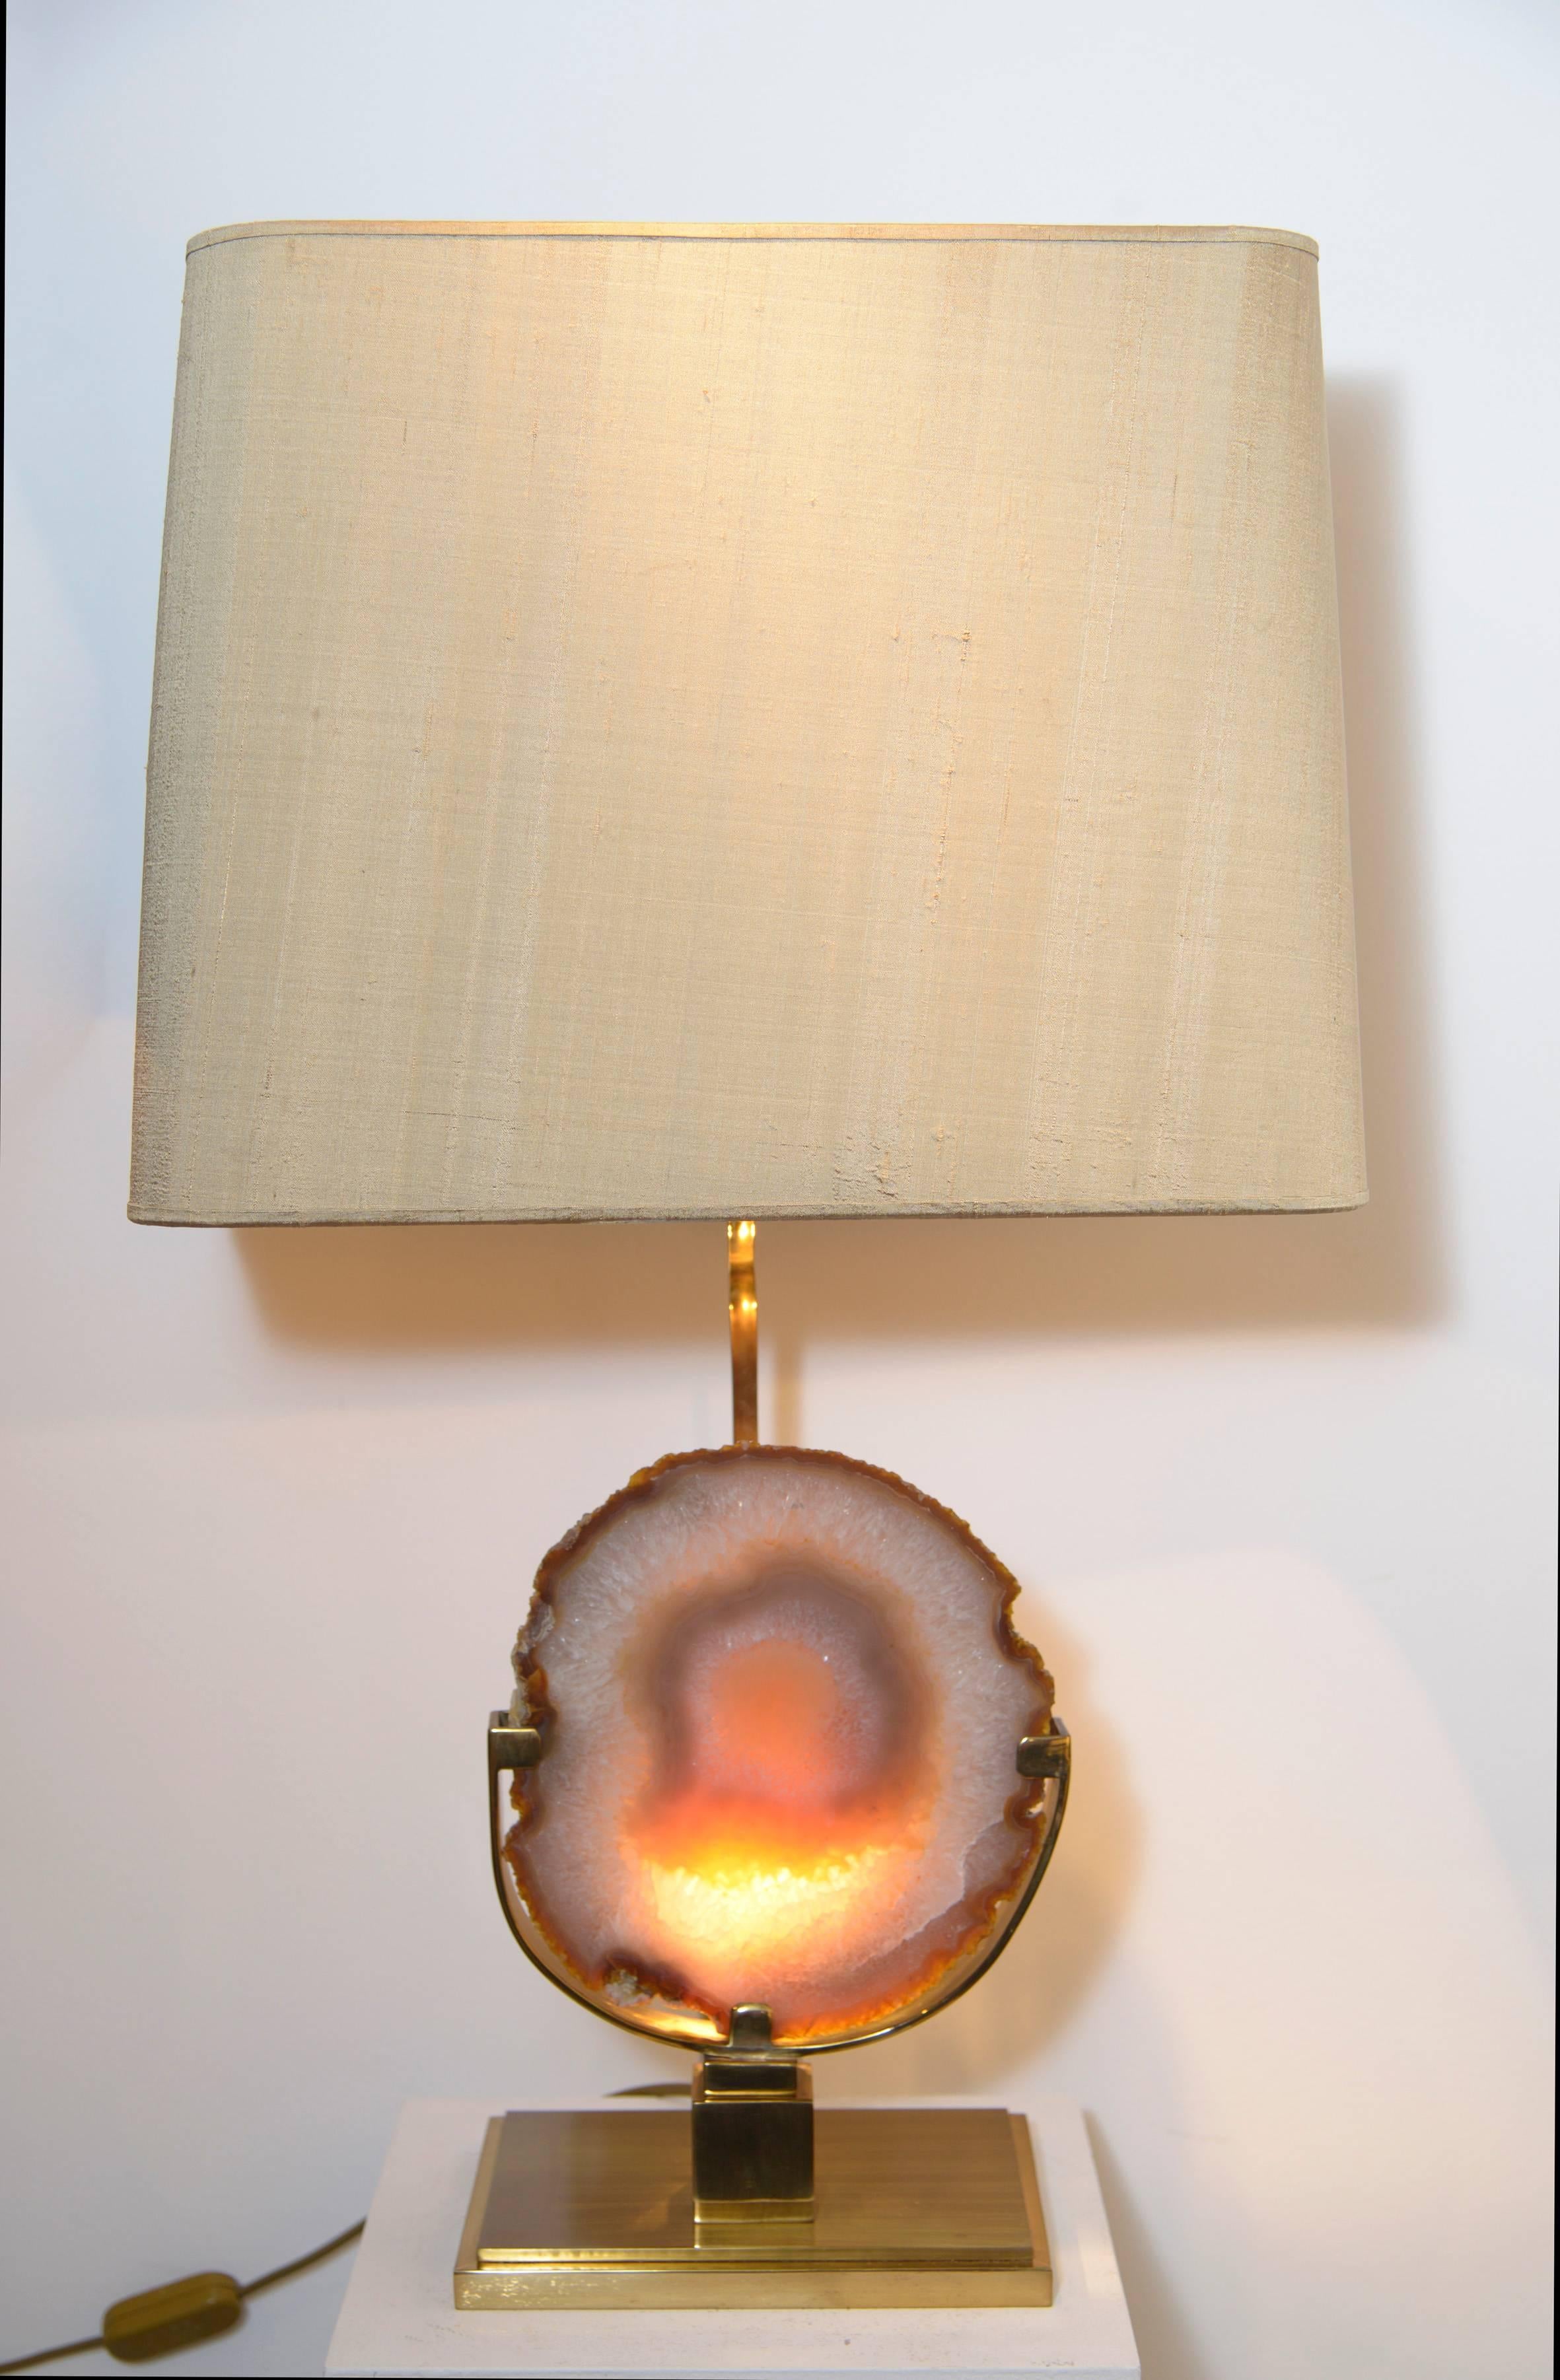 Pair of Willy Daro bronze and agate table lamps,
Belgian, circa 1970.
Original shades.
Original continental wiring.
Measures: Total height 73 cm.